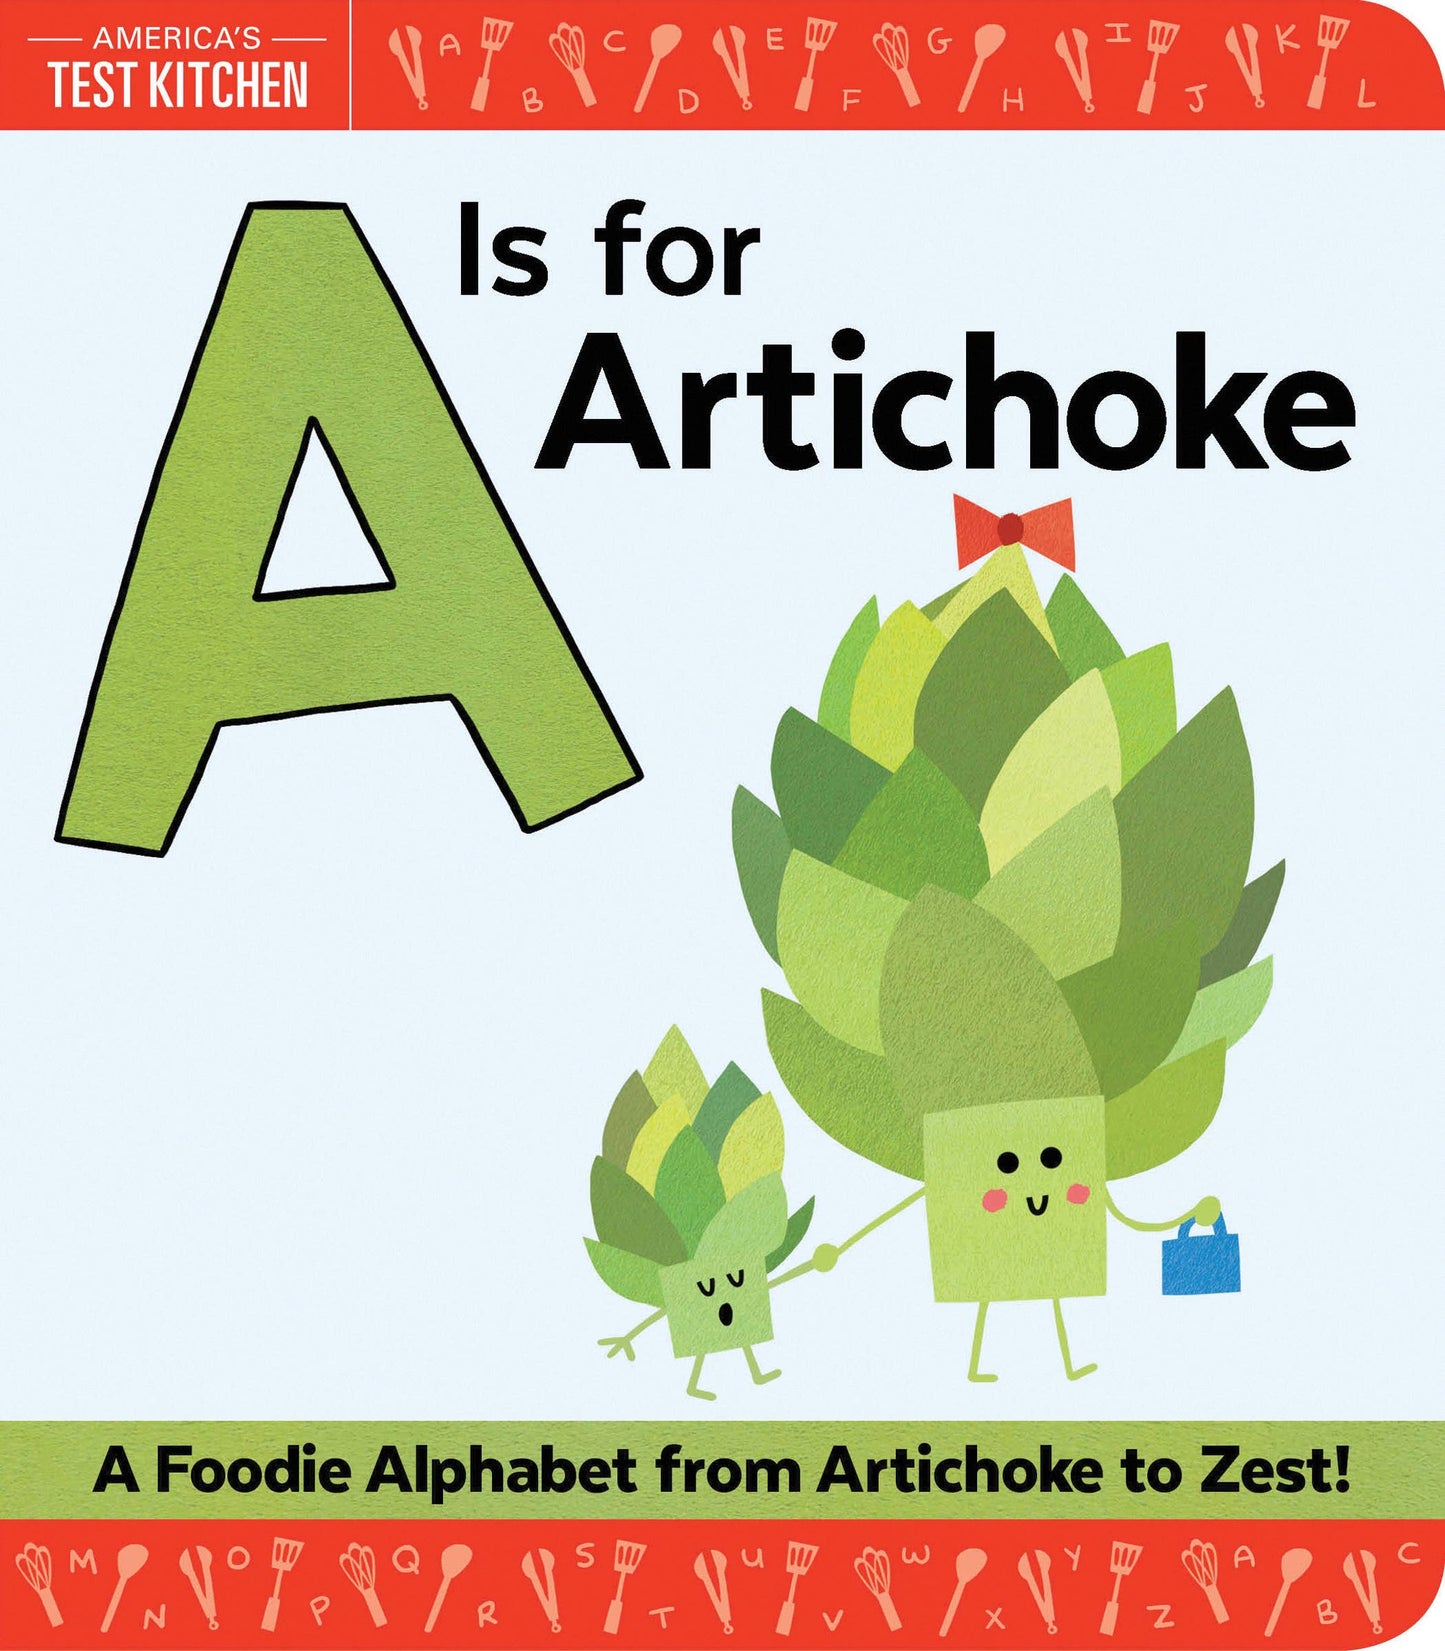 A Is for Artichoke: An ABC Book of Food, Kitchens, and Cooking for Kids, from Artichoke to Zest (America's Test Kitchen Kids)